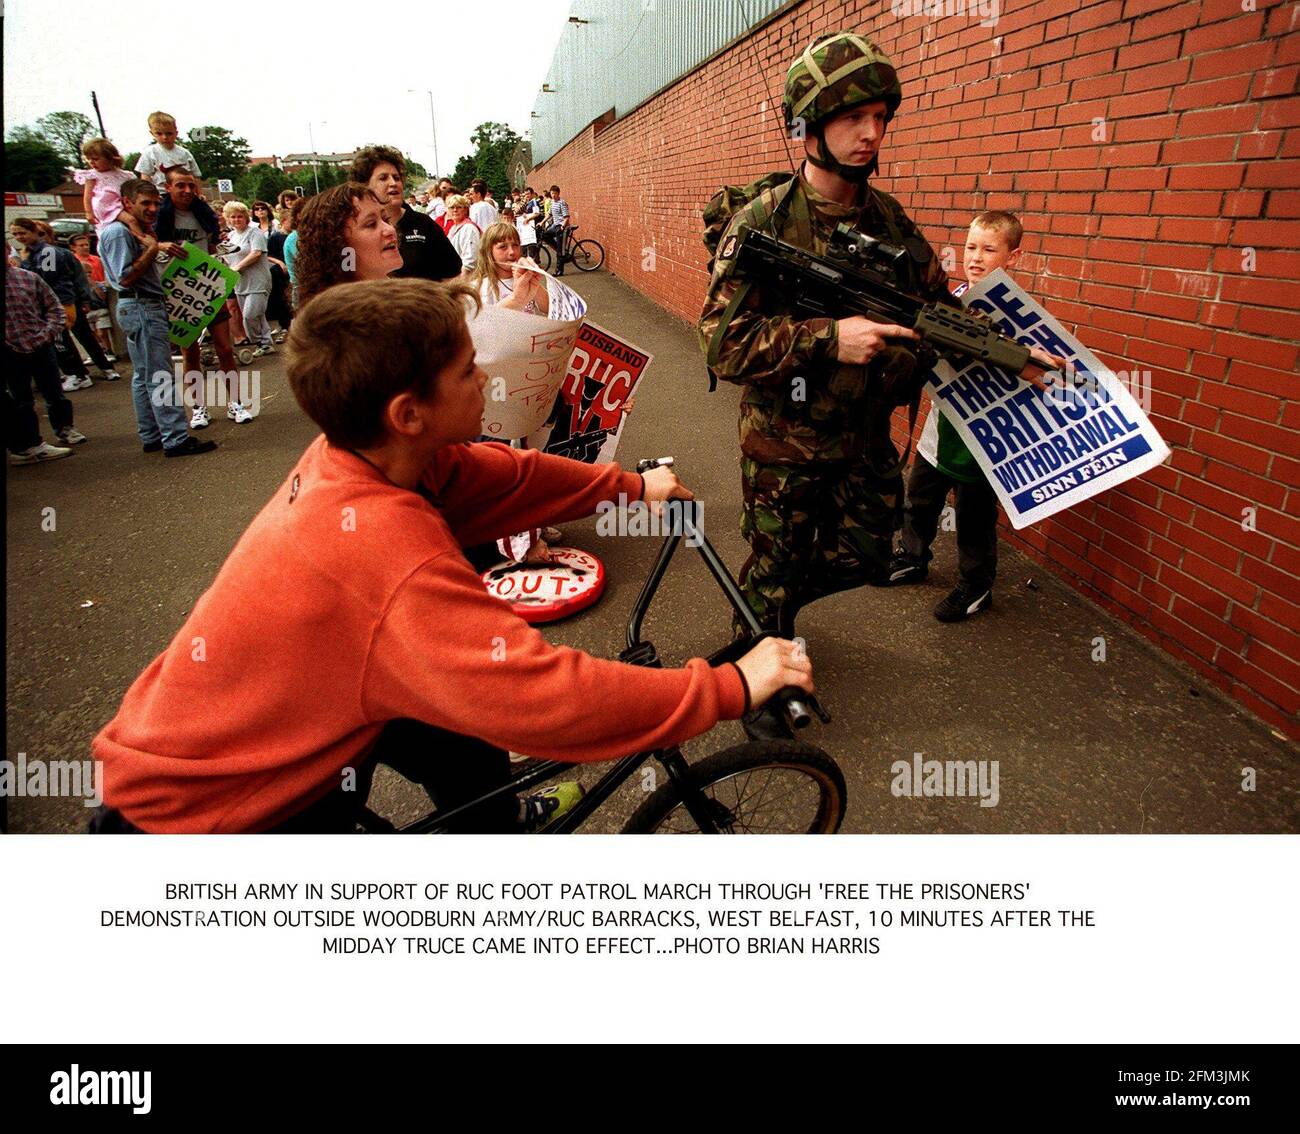 Northern Ireland IRA Ceasefire July 1997 Young catholic children taunt Young British soldier at the Free the Prisoners demonstration outside Woodburn Army/RUC Barracks in West Belfast ten minutes after the renewed IRA